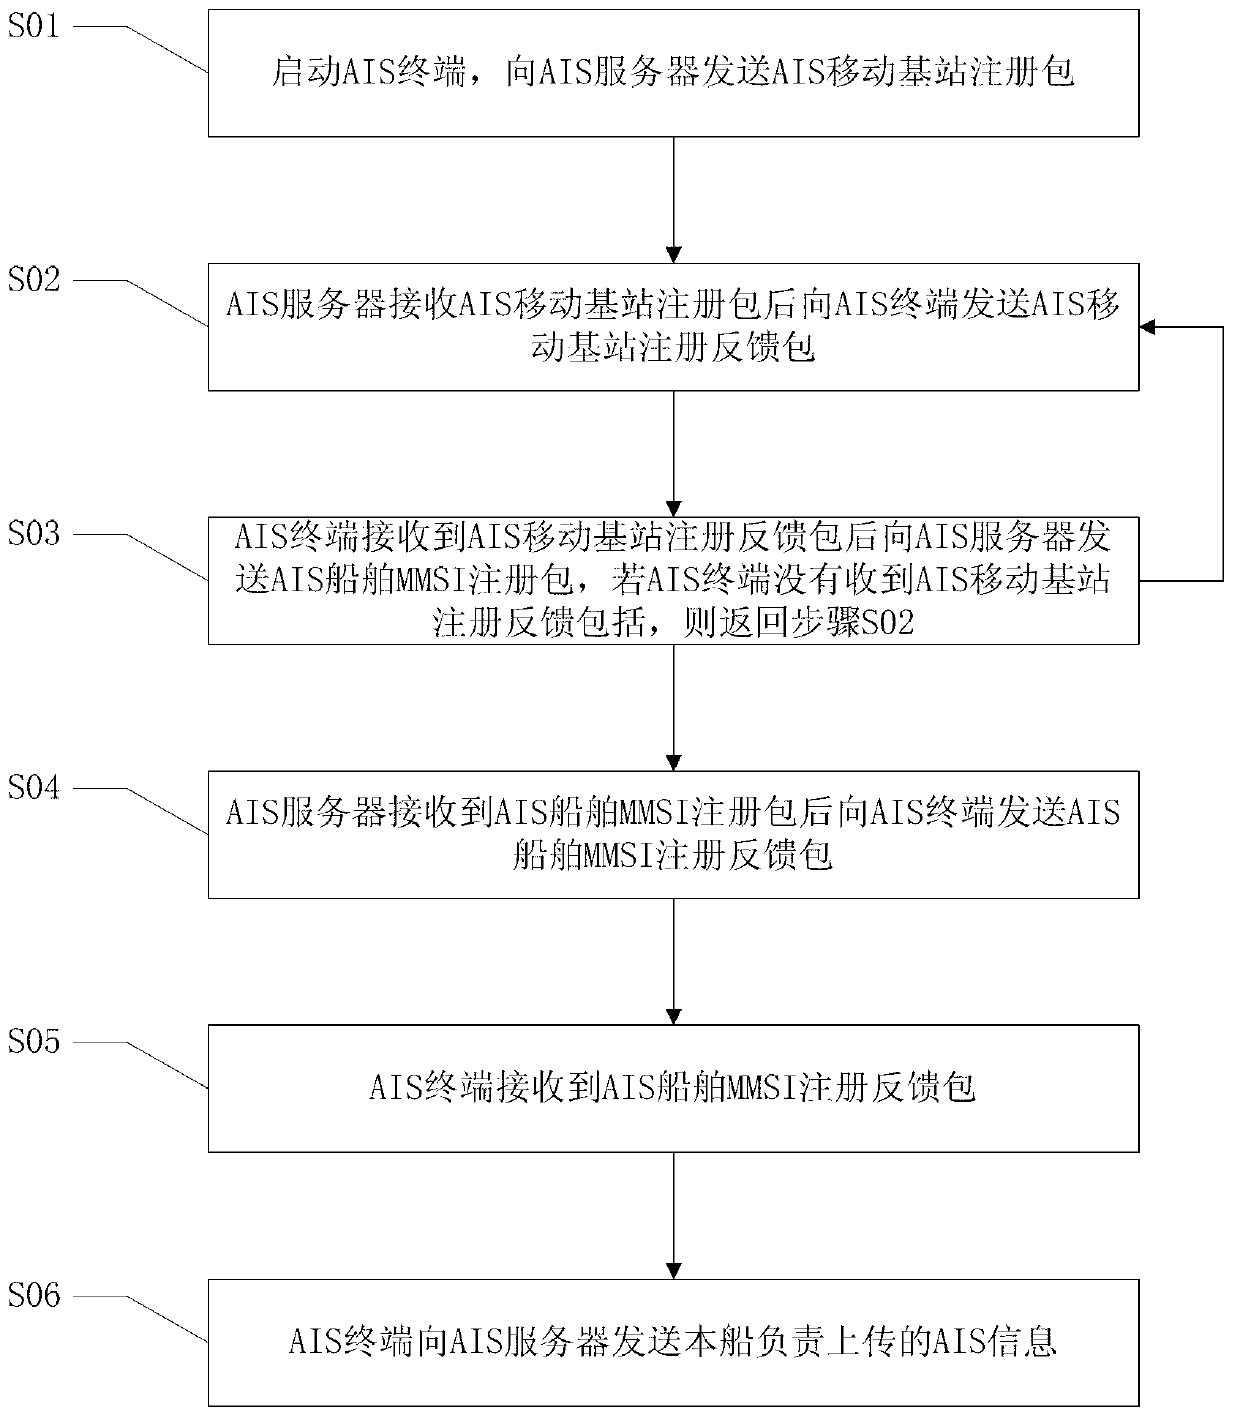 Data transmission method for automatic identification system (AIS) mobile base station